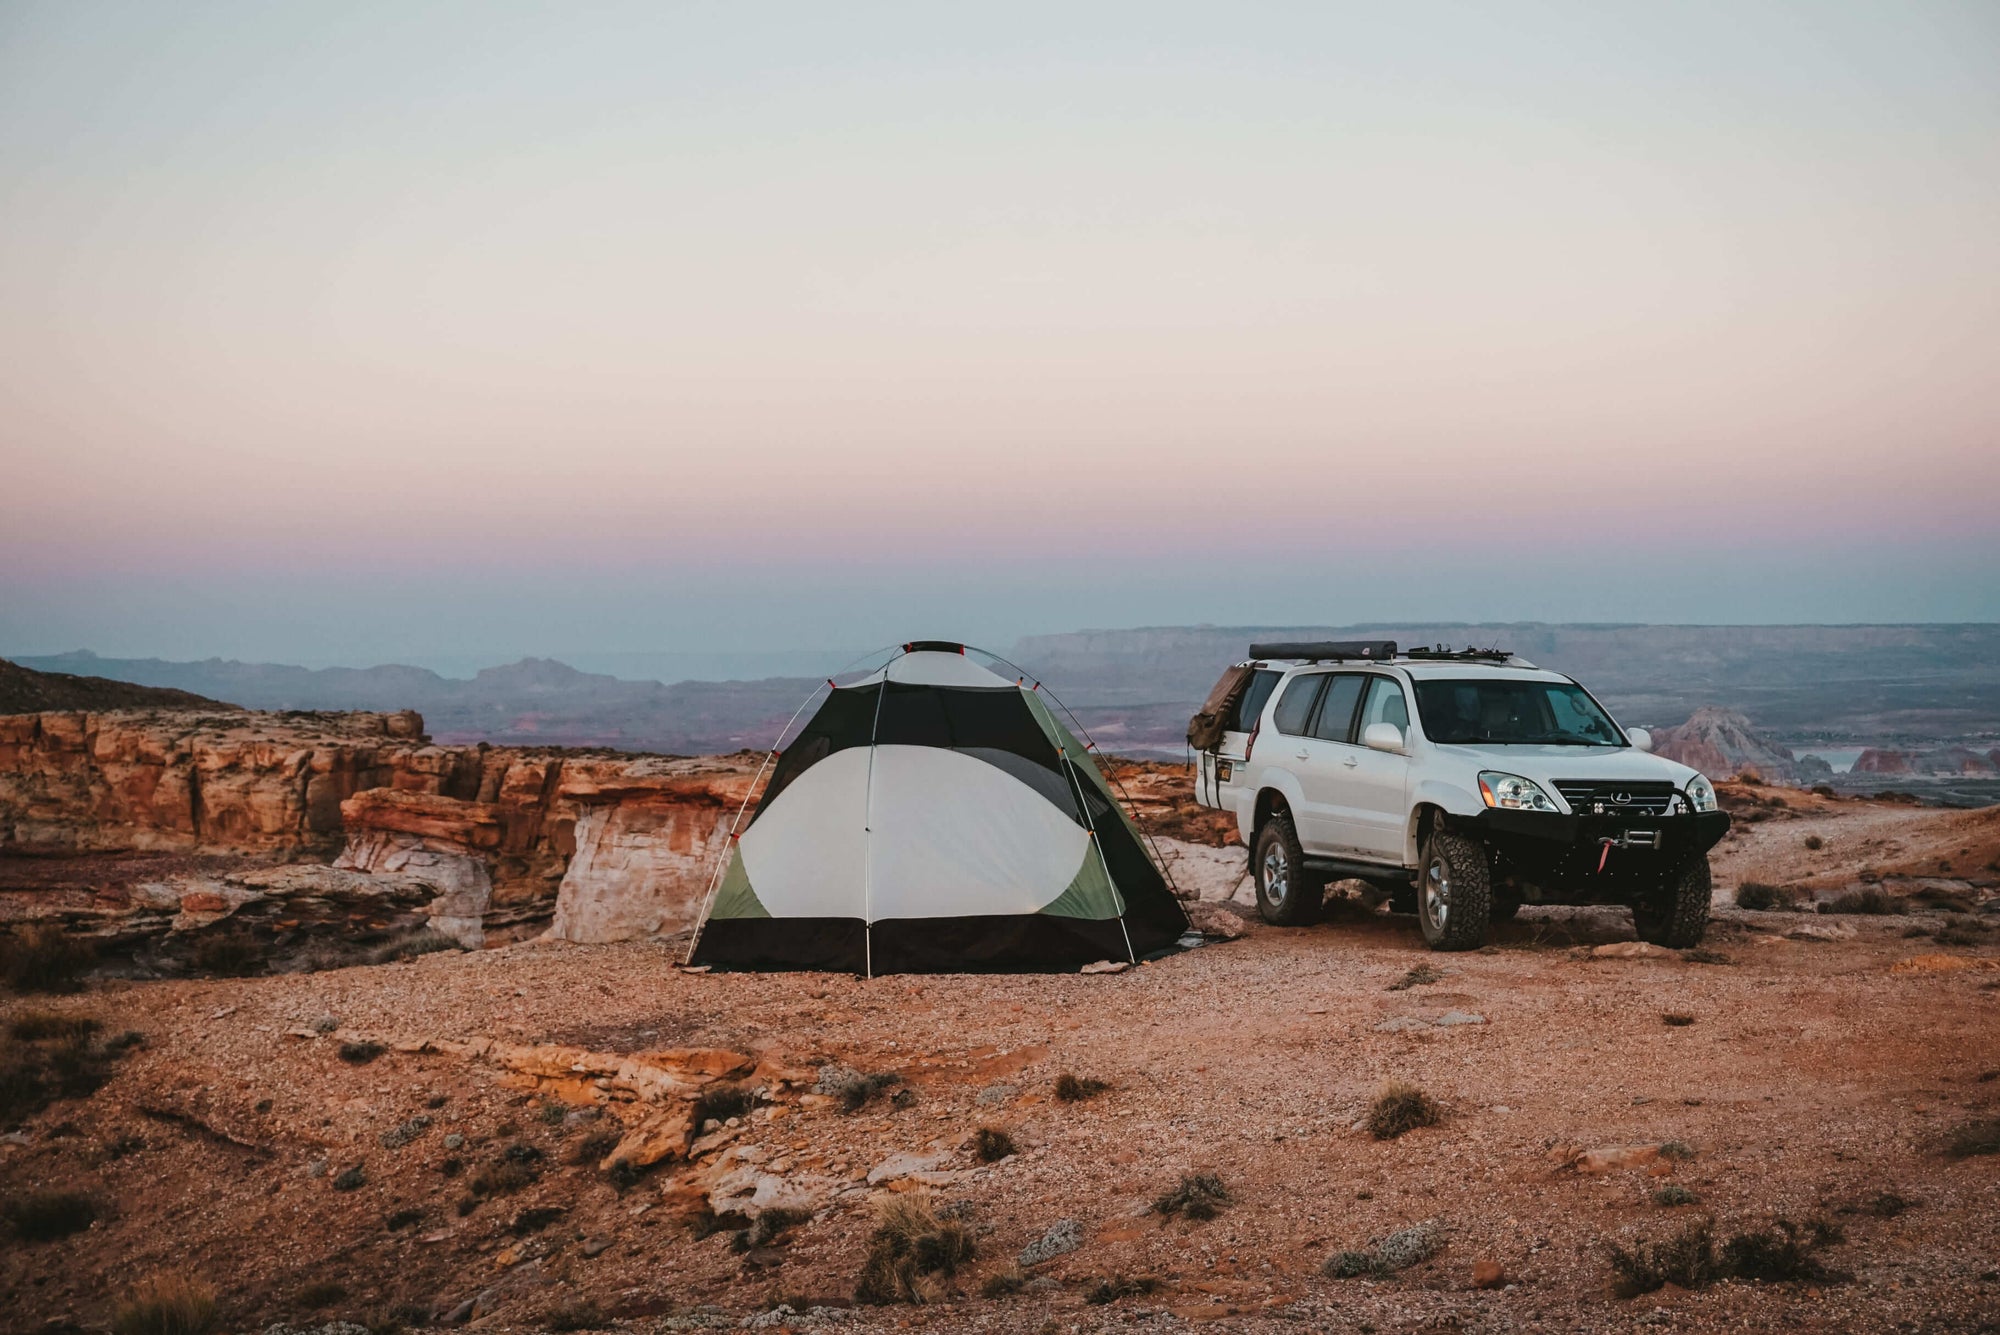 What are the essentials for car camping？